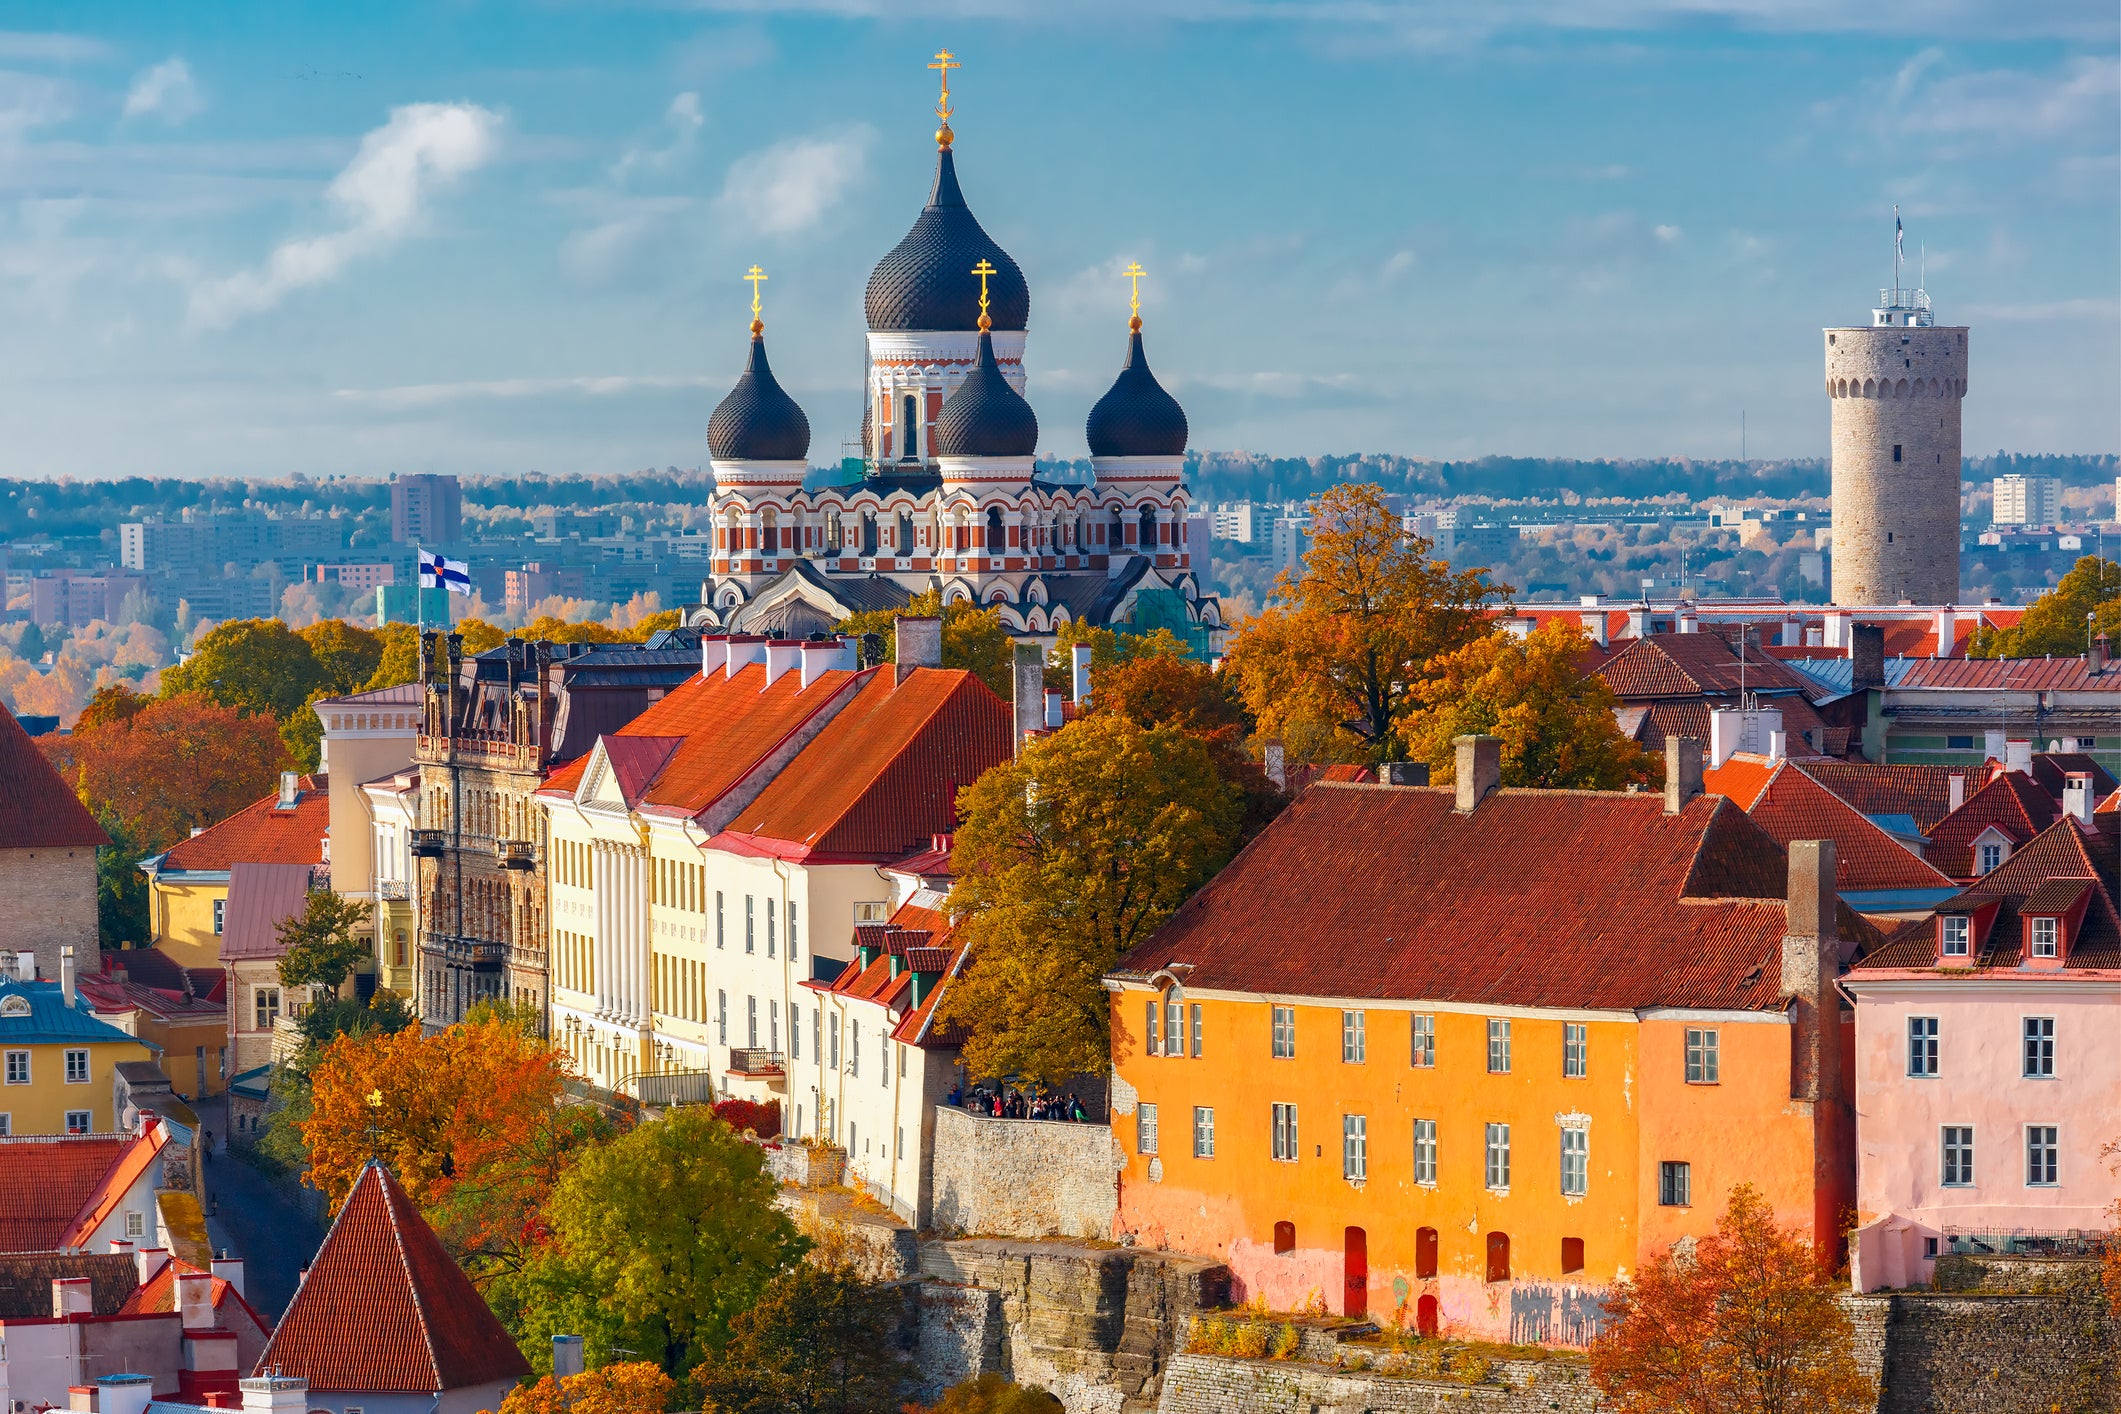 Tallinn was voted the best value city for 2018 (Getty/iStockphoto)